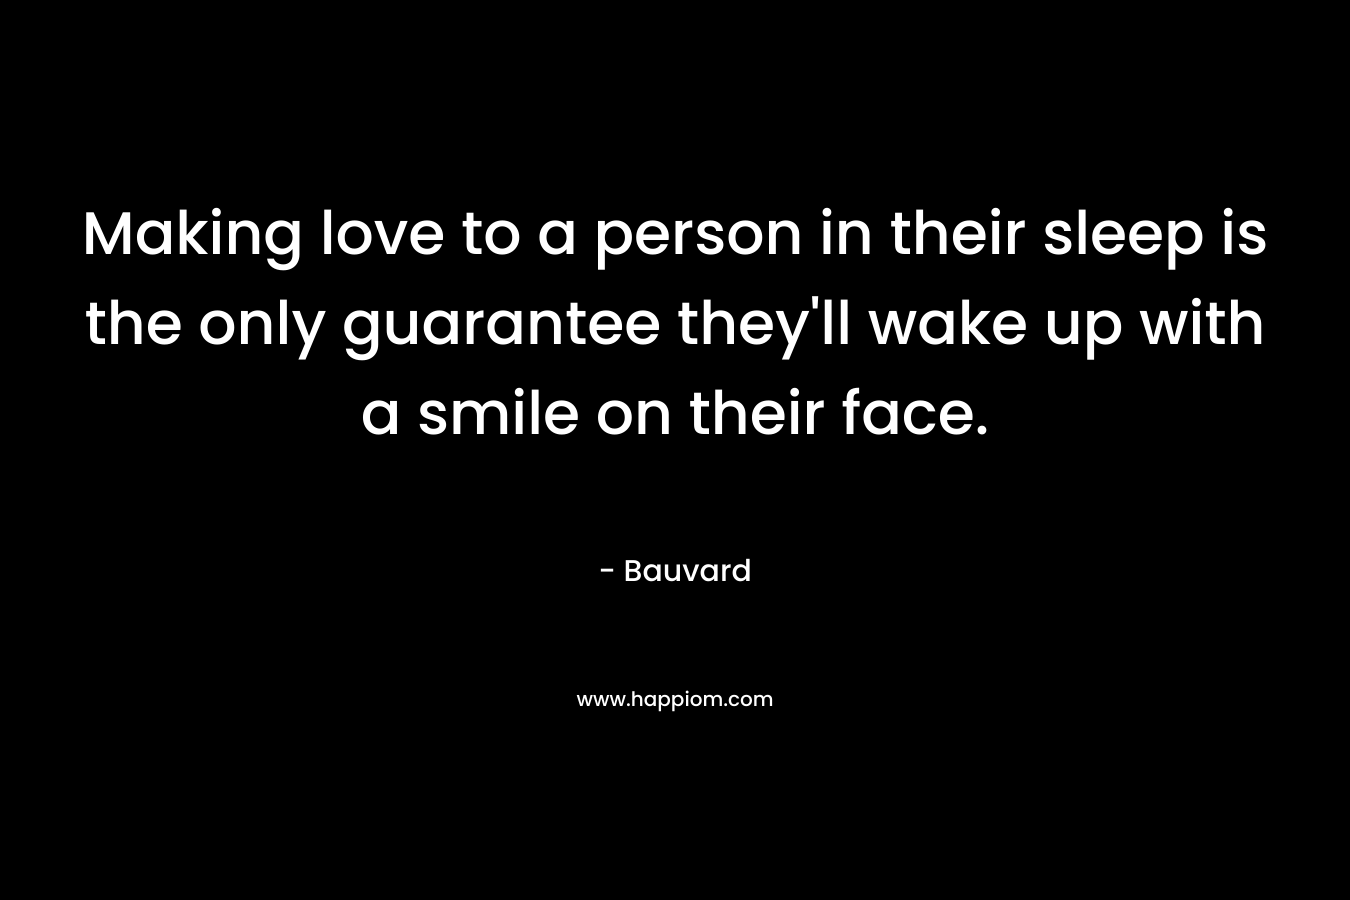 Making love to a person in their sleep is the only guarantee they’ll wake up with a smile on their face. – Bauvard